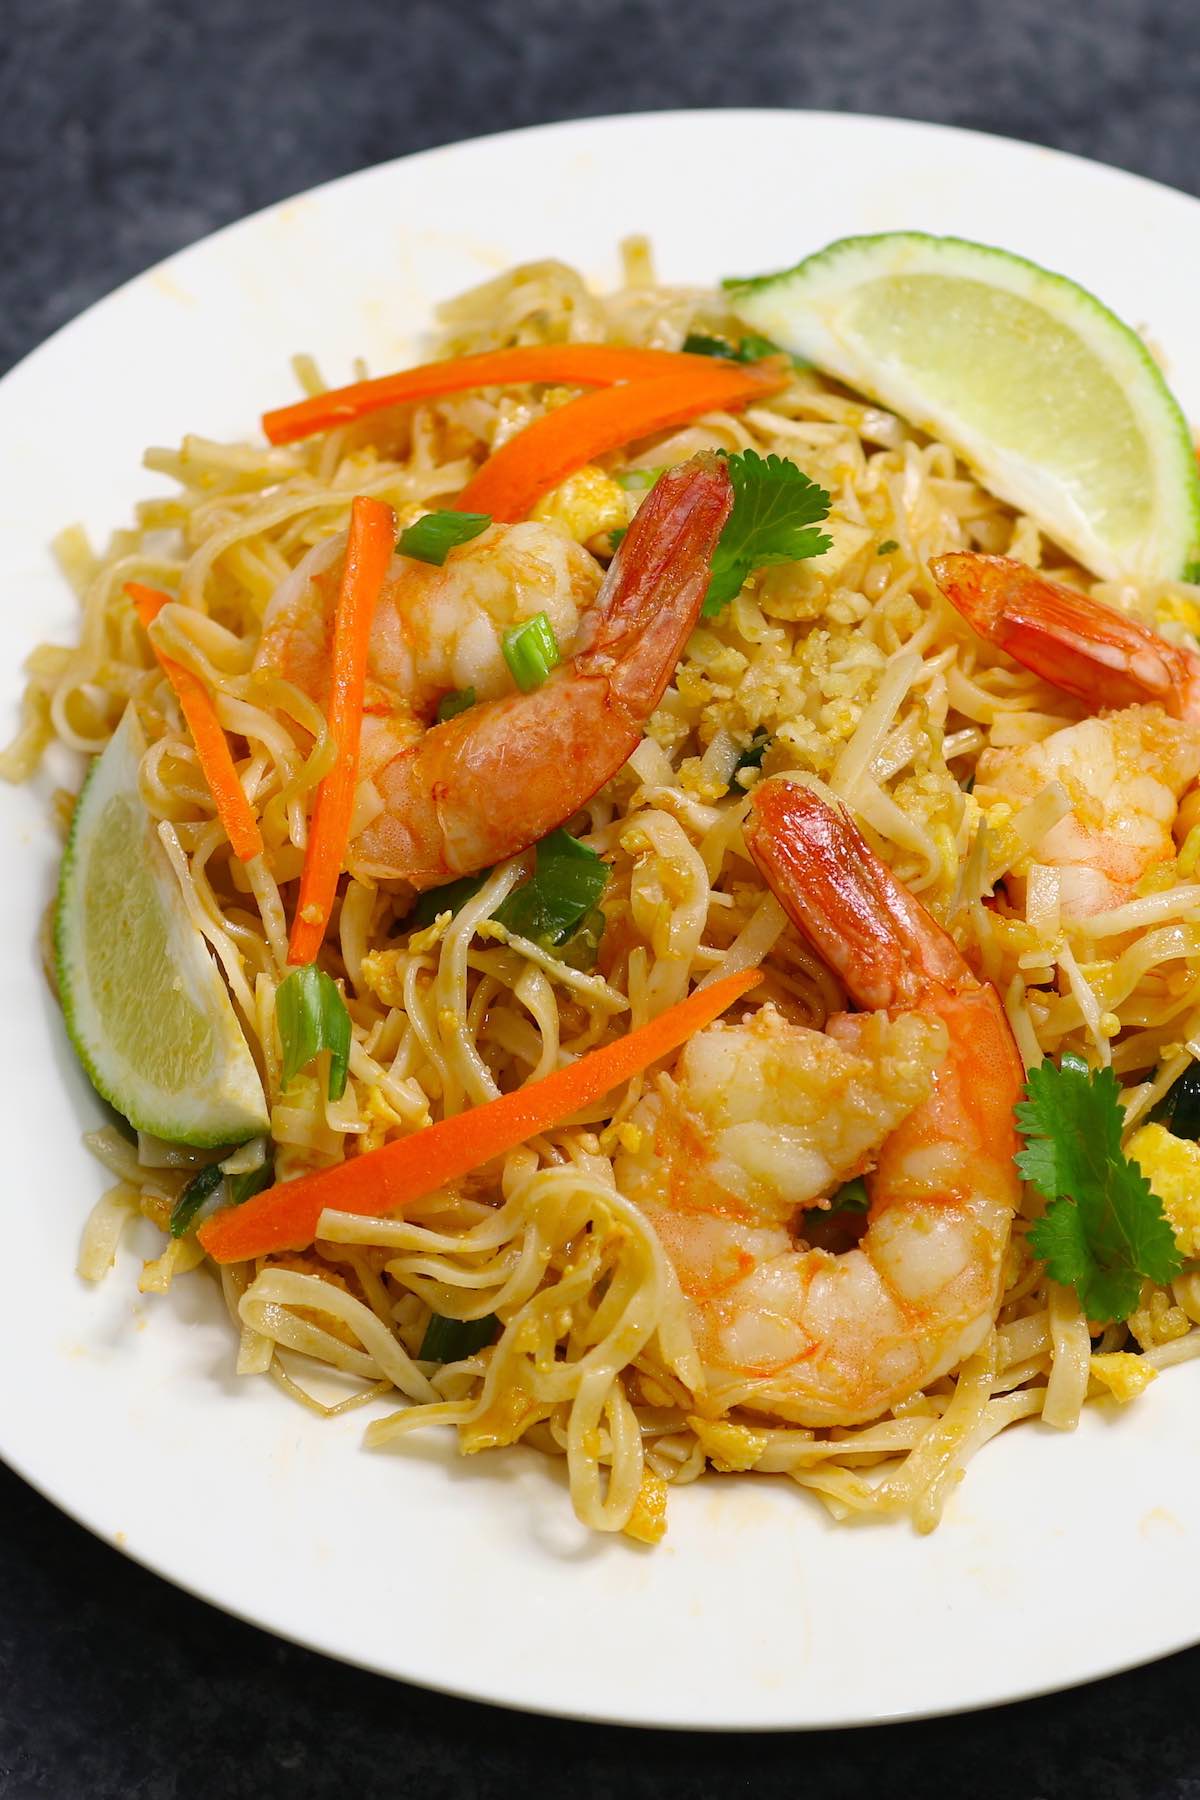 Shrimp Pad Thai is loaded with sweet, sour and spicy shrimp, mixed with rice noodles and vegetables. It’s so simple and easy to make. Try it once and you won’t want to go back to takeout! It comes together in only 20 minutes. 